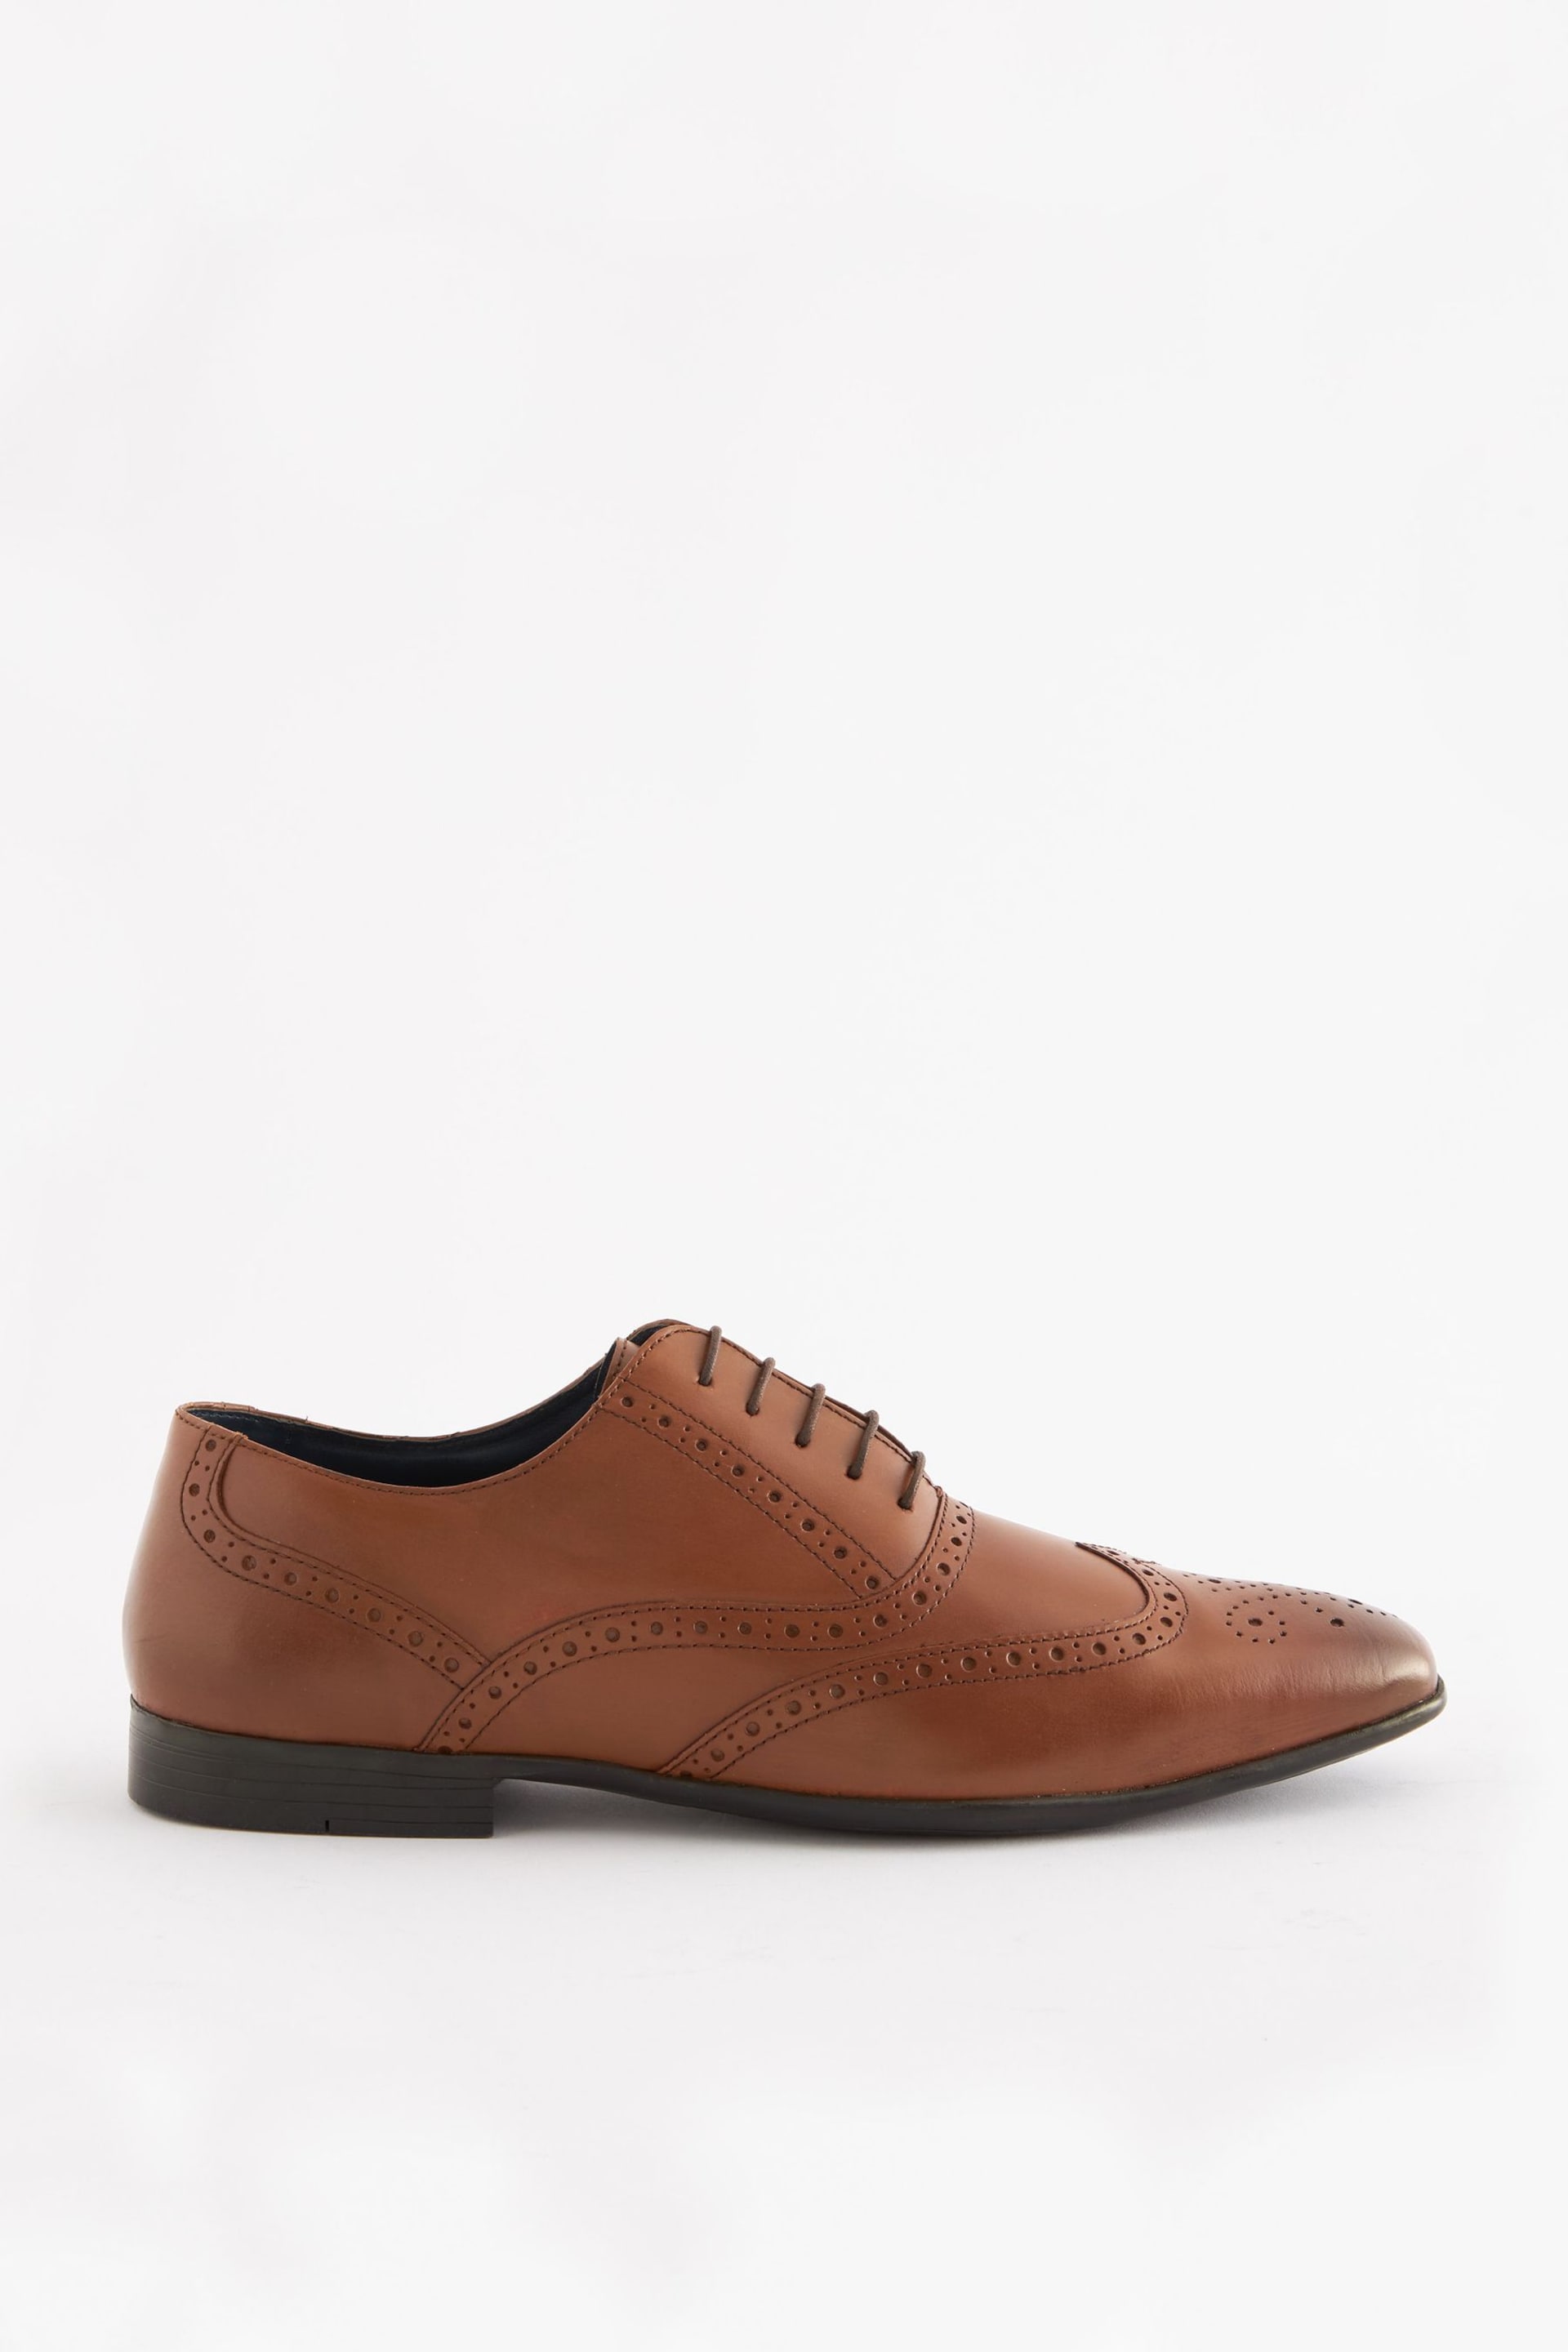 Tan Brown Wide Fit Leather Oxford Brogue Shoes - Image 2 of 6